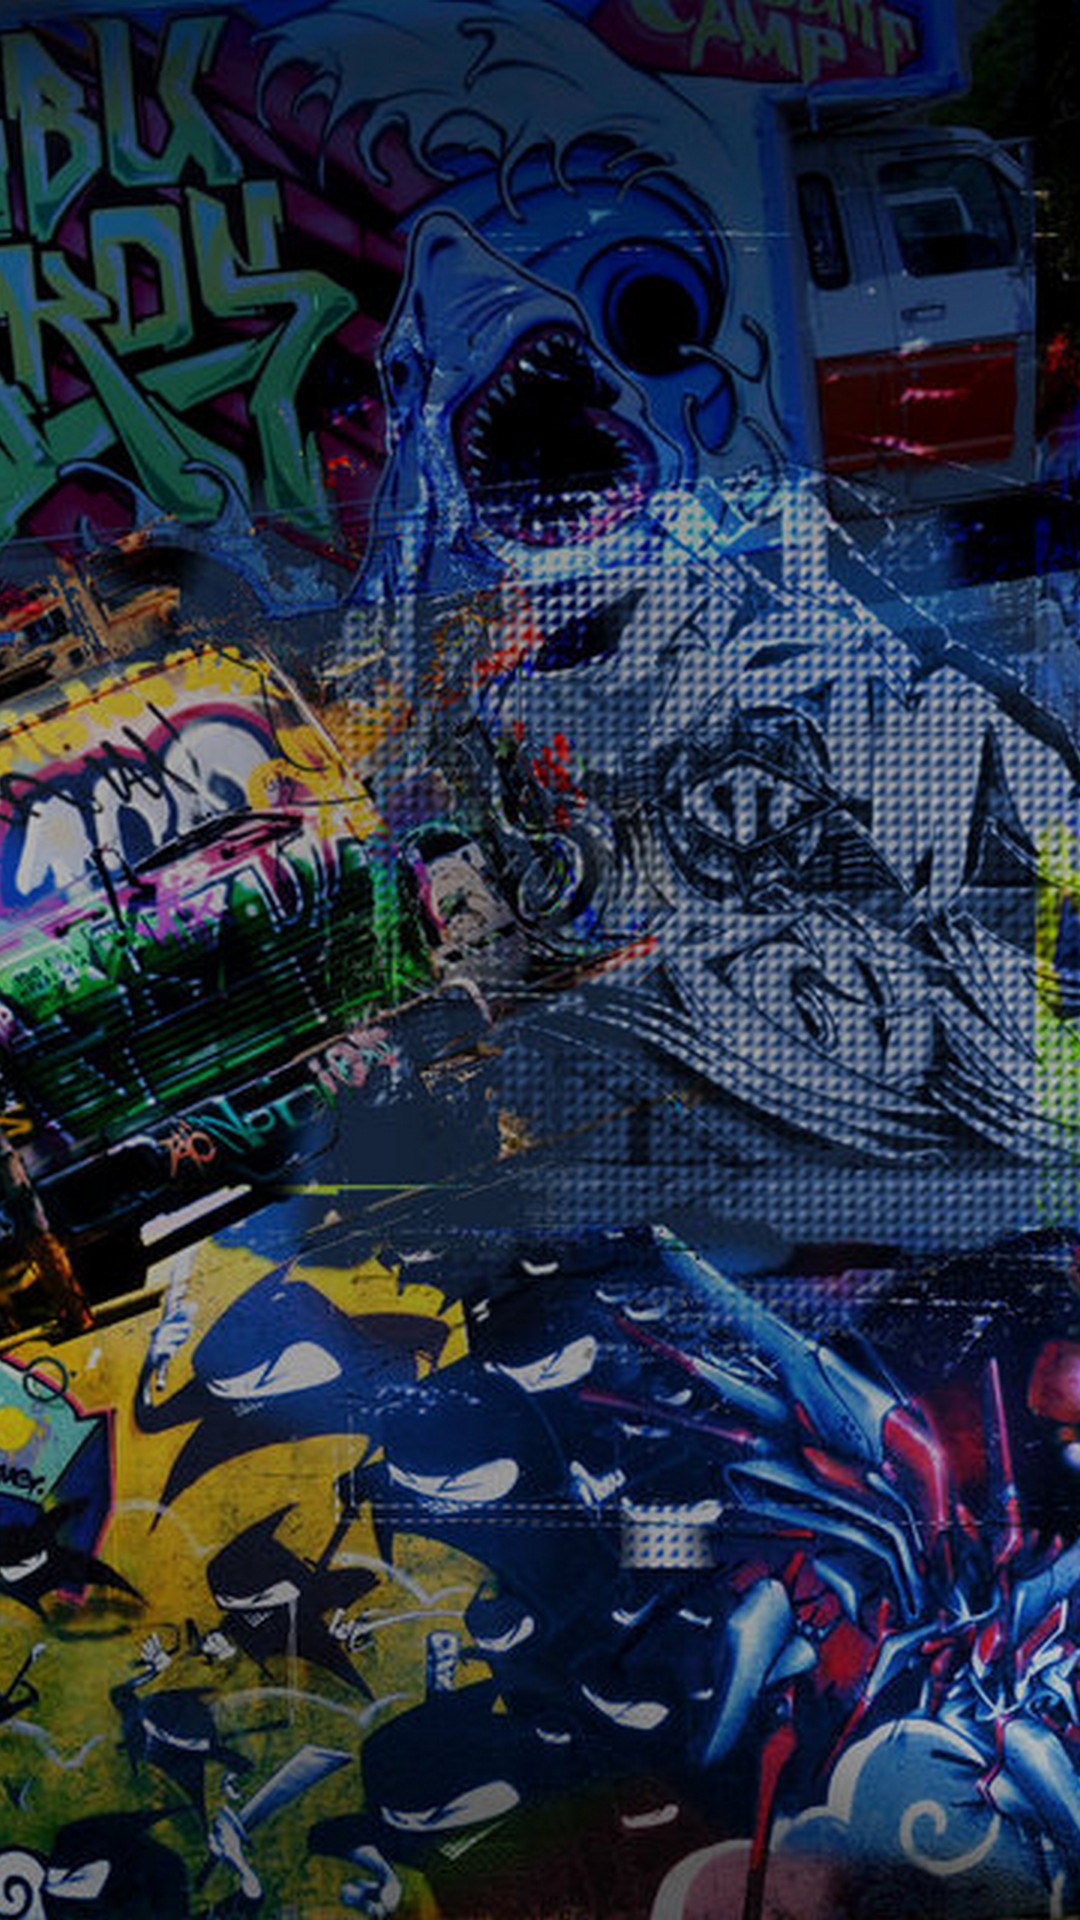 Graffiti Tag Wallpaper For Android with resolution 1080X1920 pixel. You can make this wallpaper for your Android backgrounds, Tablet, Smartphones Screensavers and Mobile Phone Lock Screen